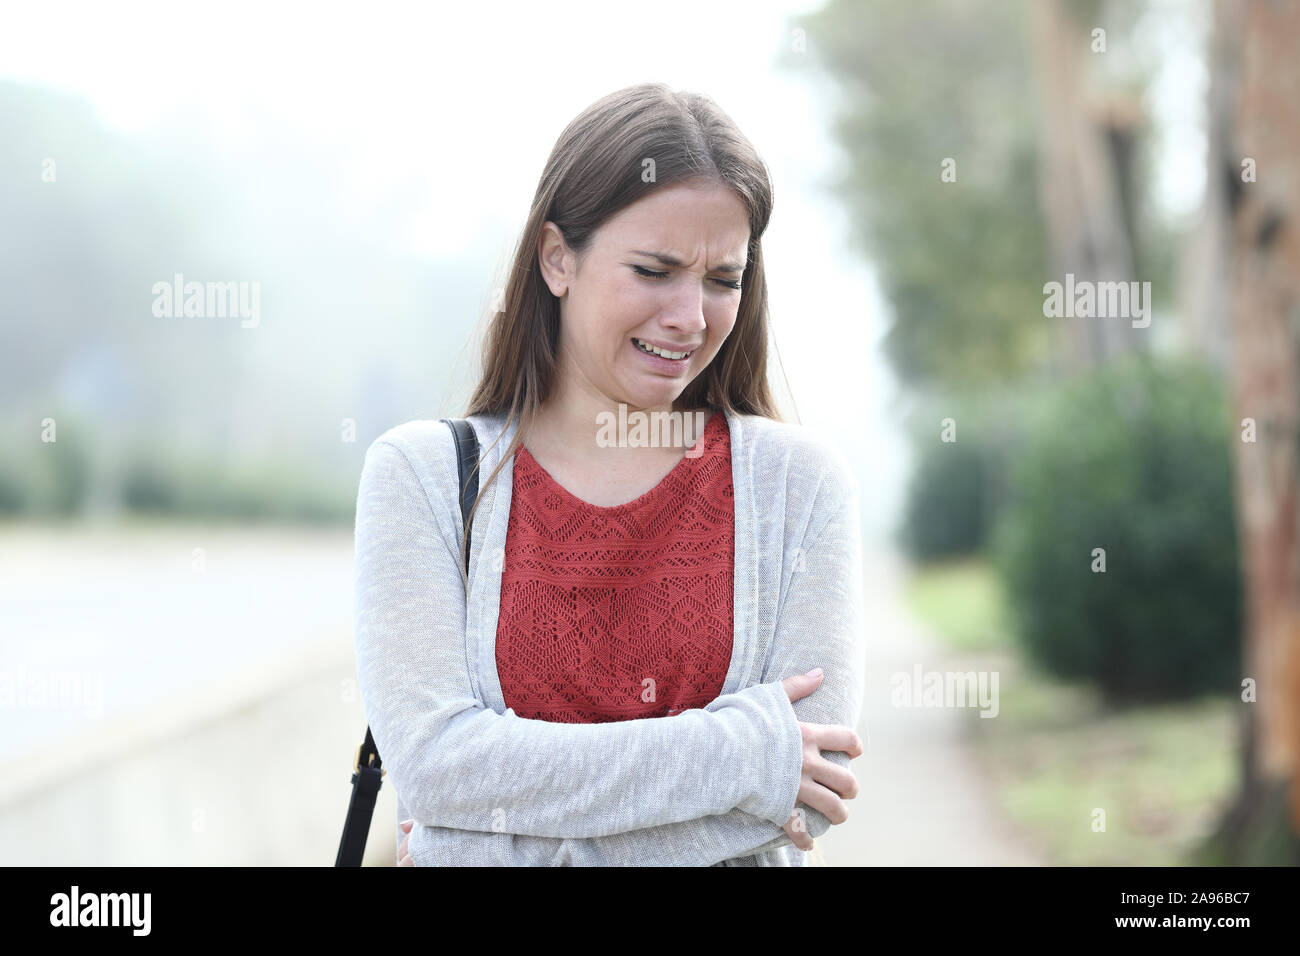 Front view portrait of a sad woman crying alone walking in a foggy park Stock Photo